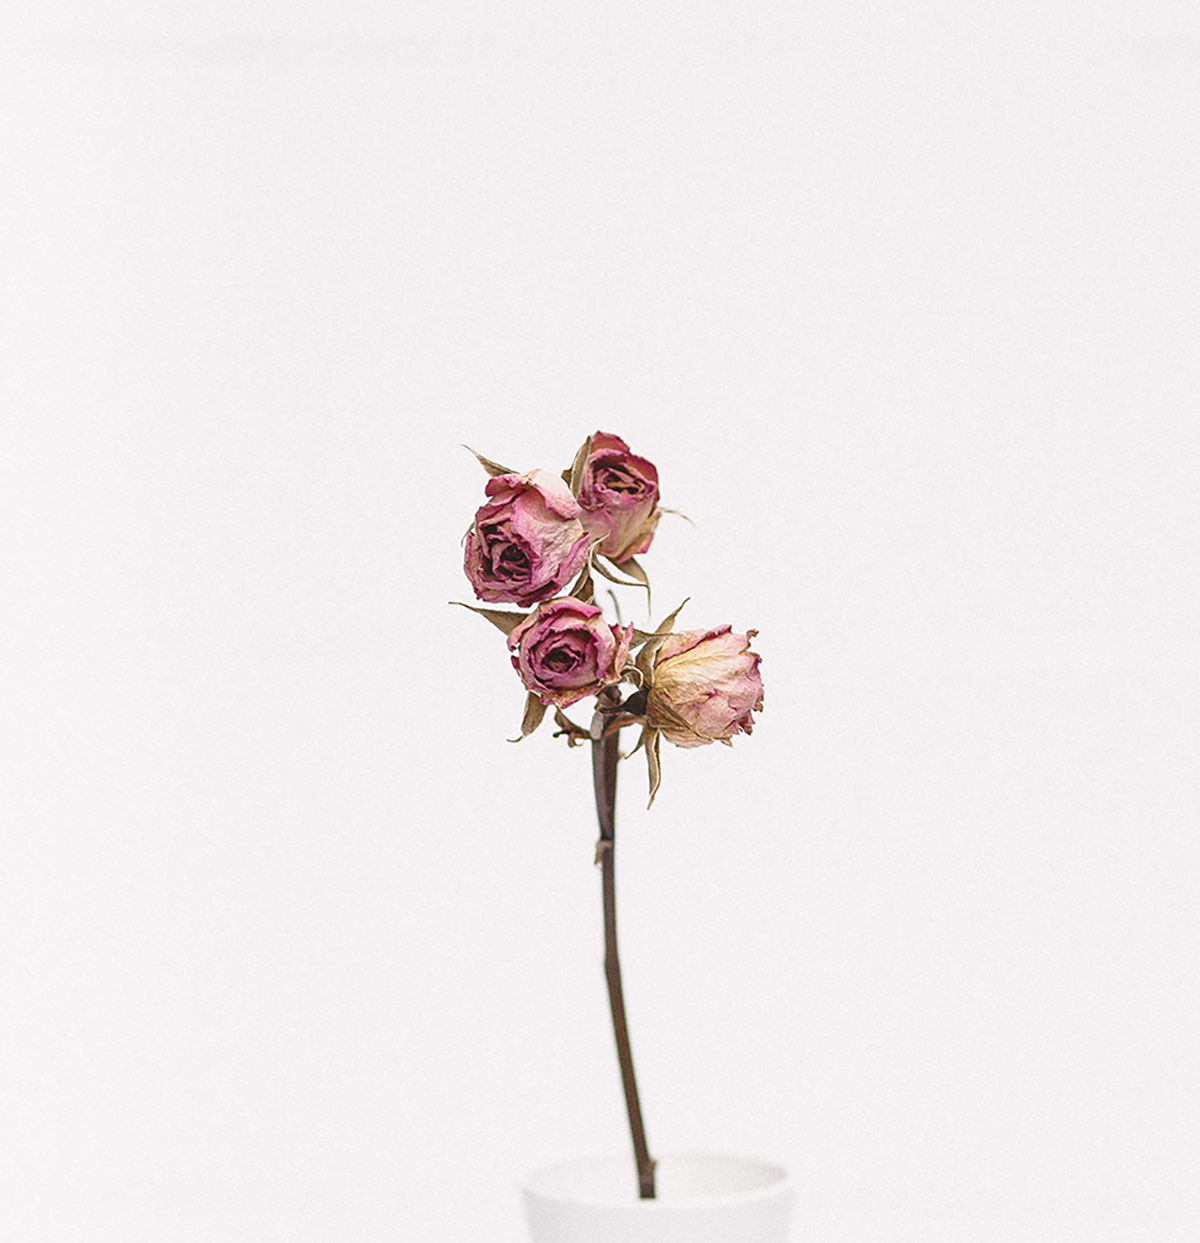 The top inch or two of white bud vase holding a faded rose stem with four pink closed roses in various states of decay.